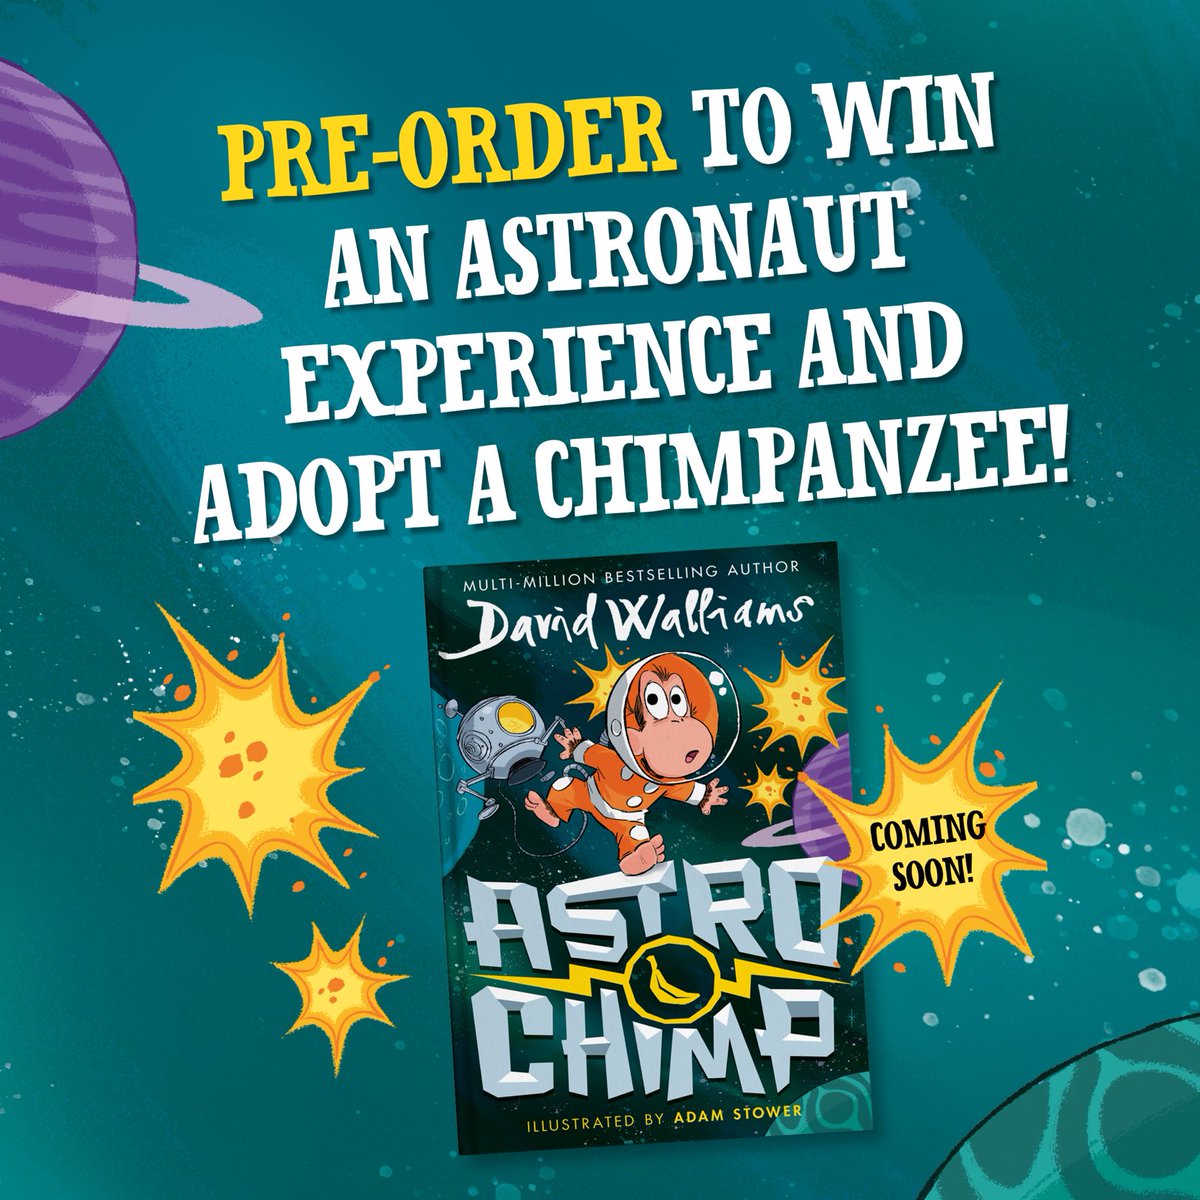 Don’t forget to pre-order #ASTROCHIMP, for your chance of winning an epic astronaut experience & an amazing ‘adopt a chimpanzee’ prize.
Enter before midnight on the 22nd May - bit.ly/AstrochimpPreo…